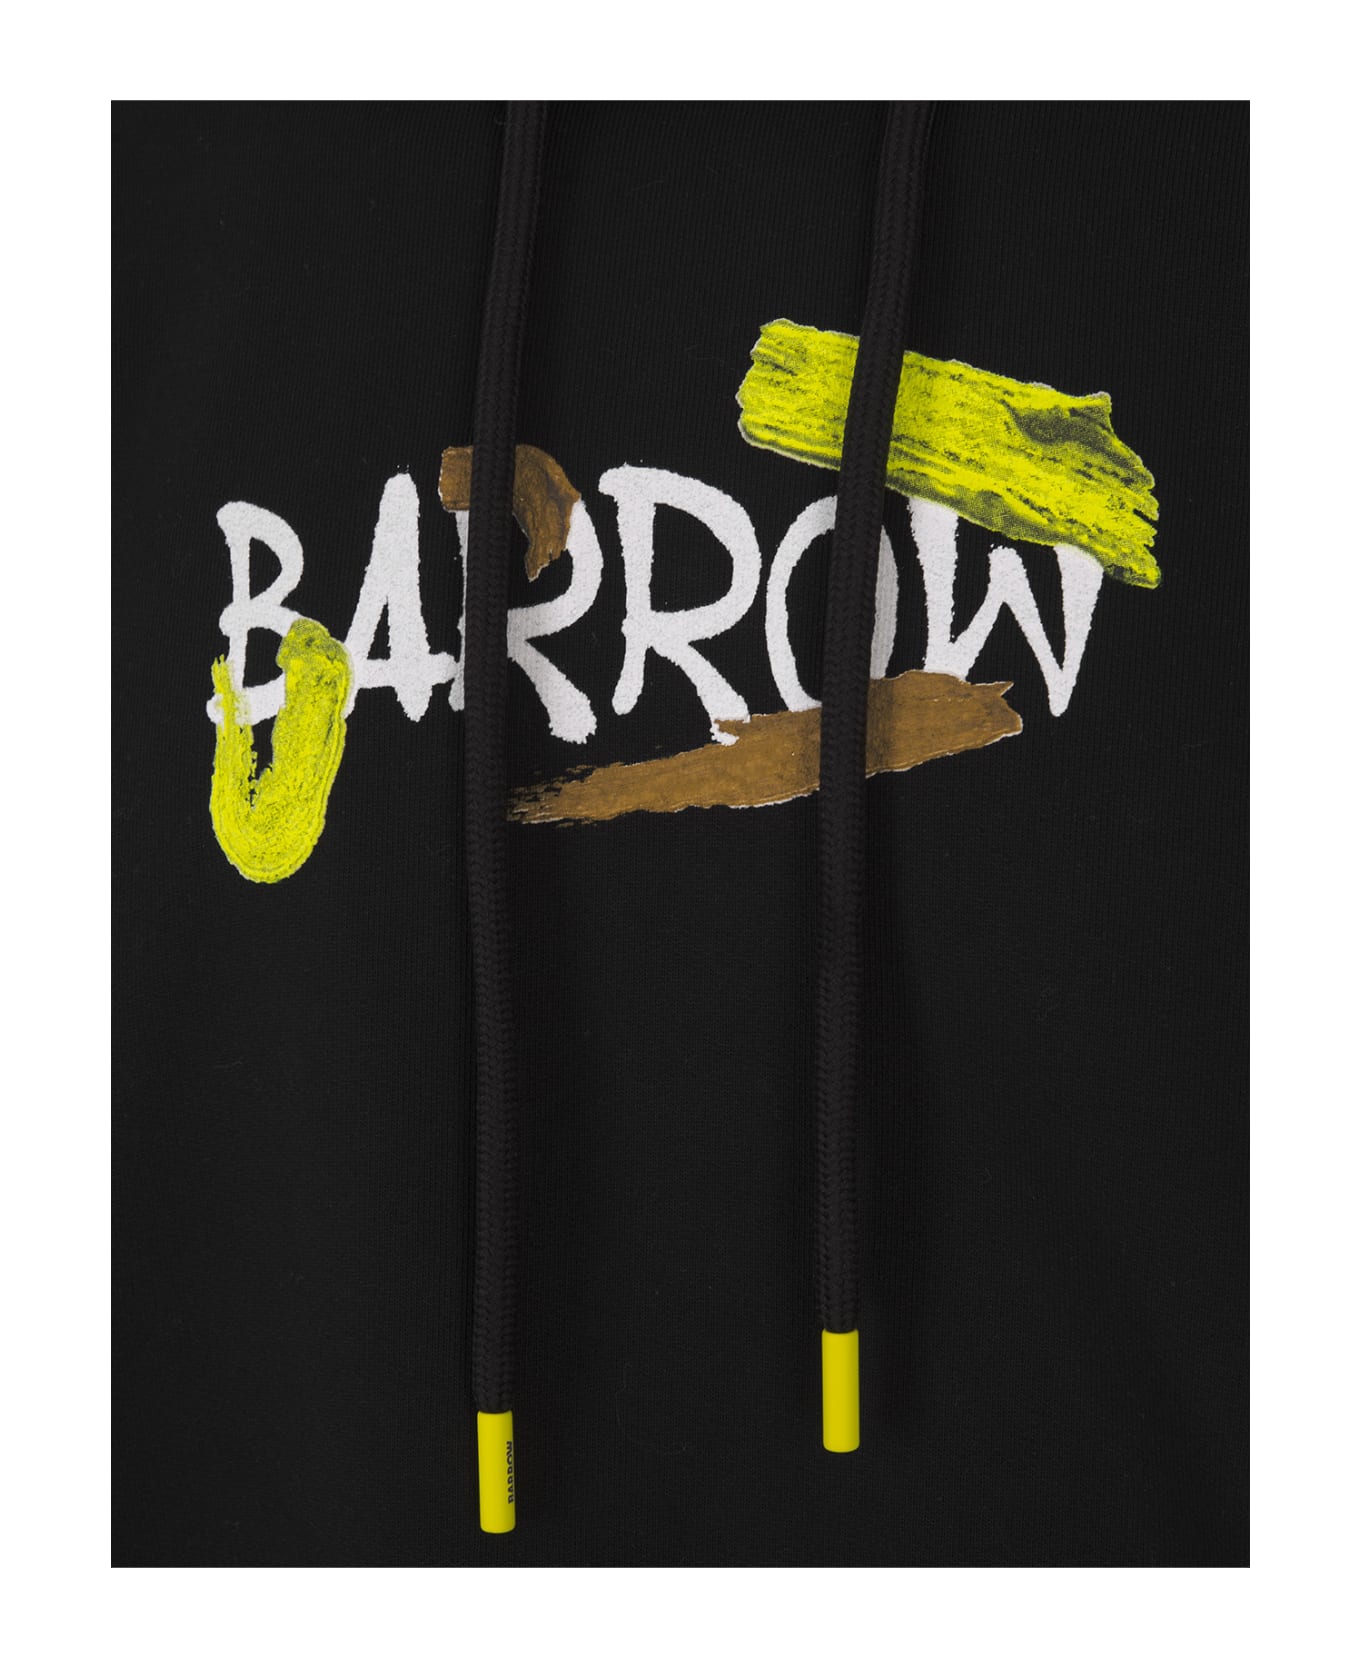 Barrow Black Hoodie With Lettering And Graphic Print - Black